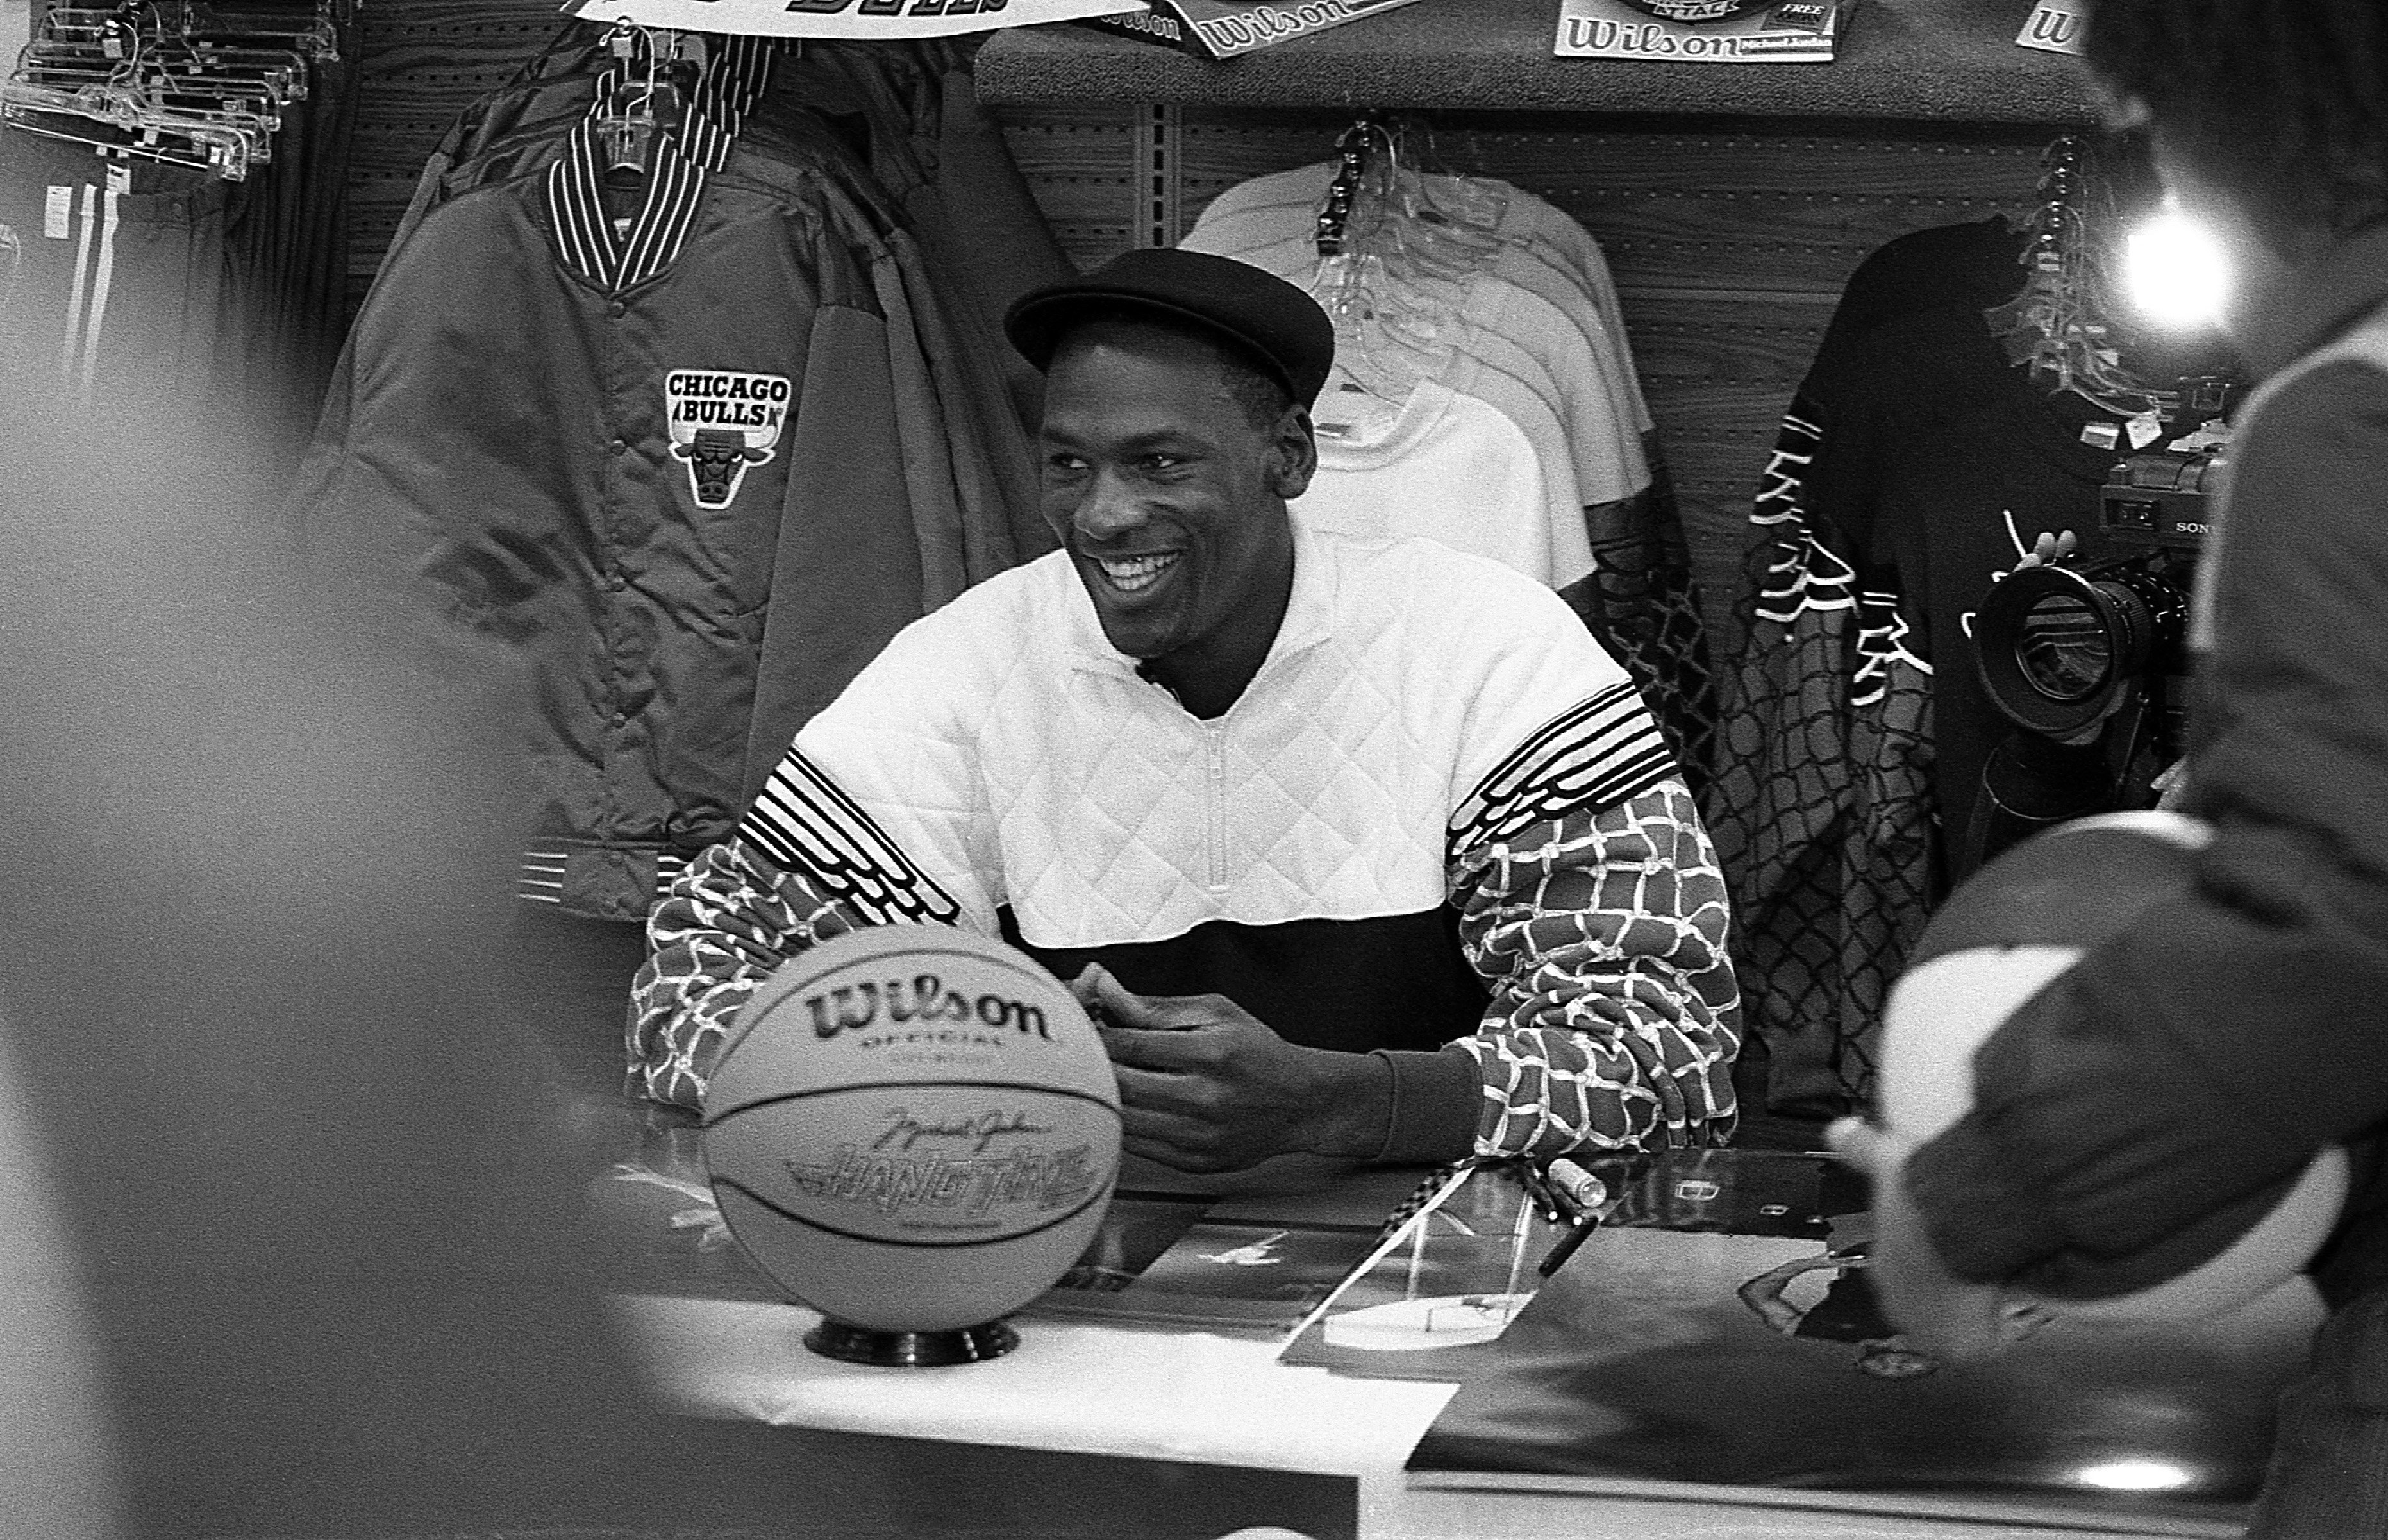 Michael Jordan signs autographs and greets fans at Sportmart in Chicago, Illinois in April 1988 | Source: Getty Images